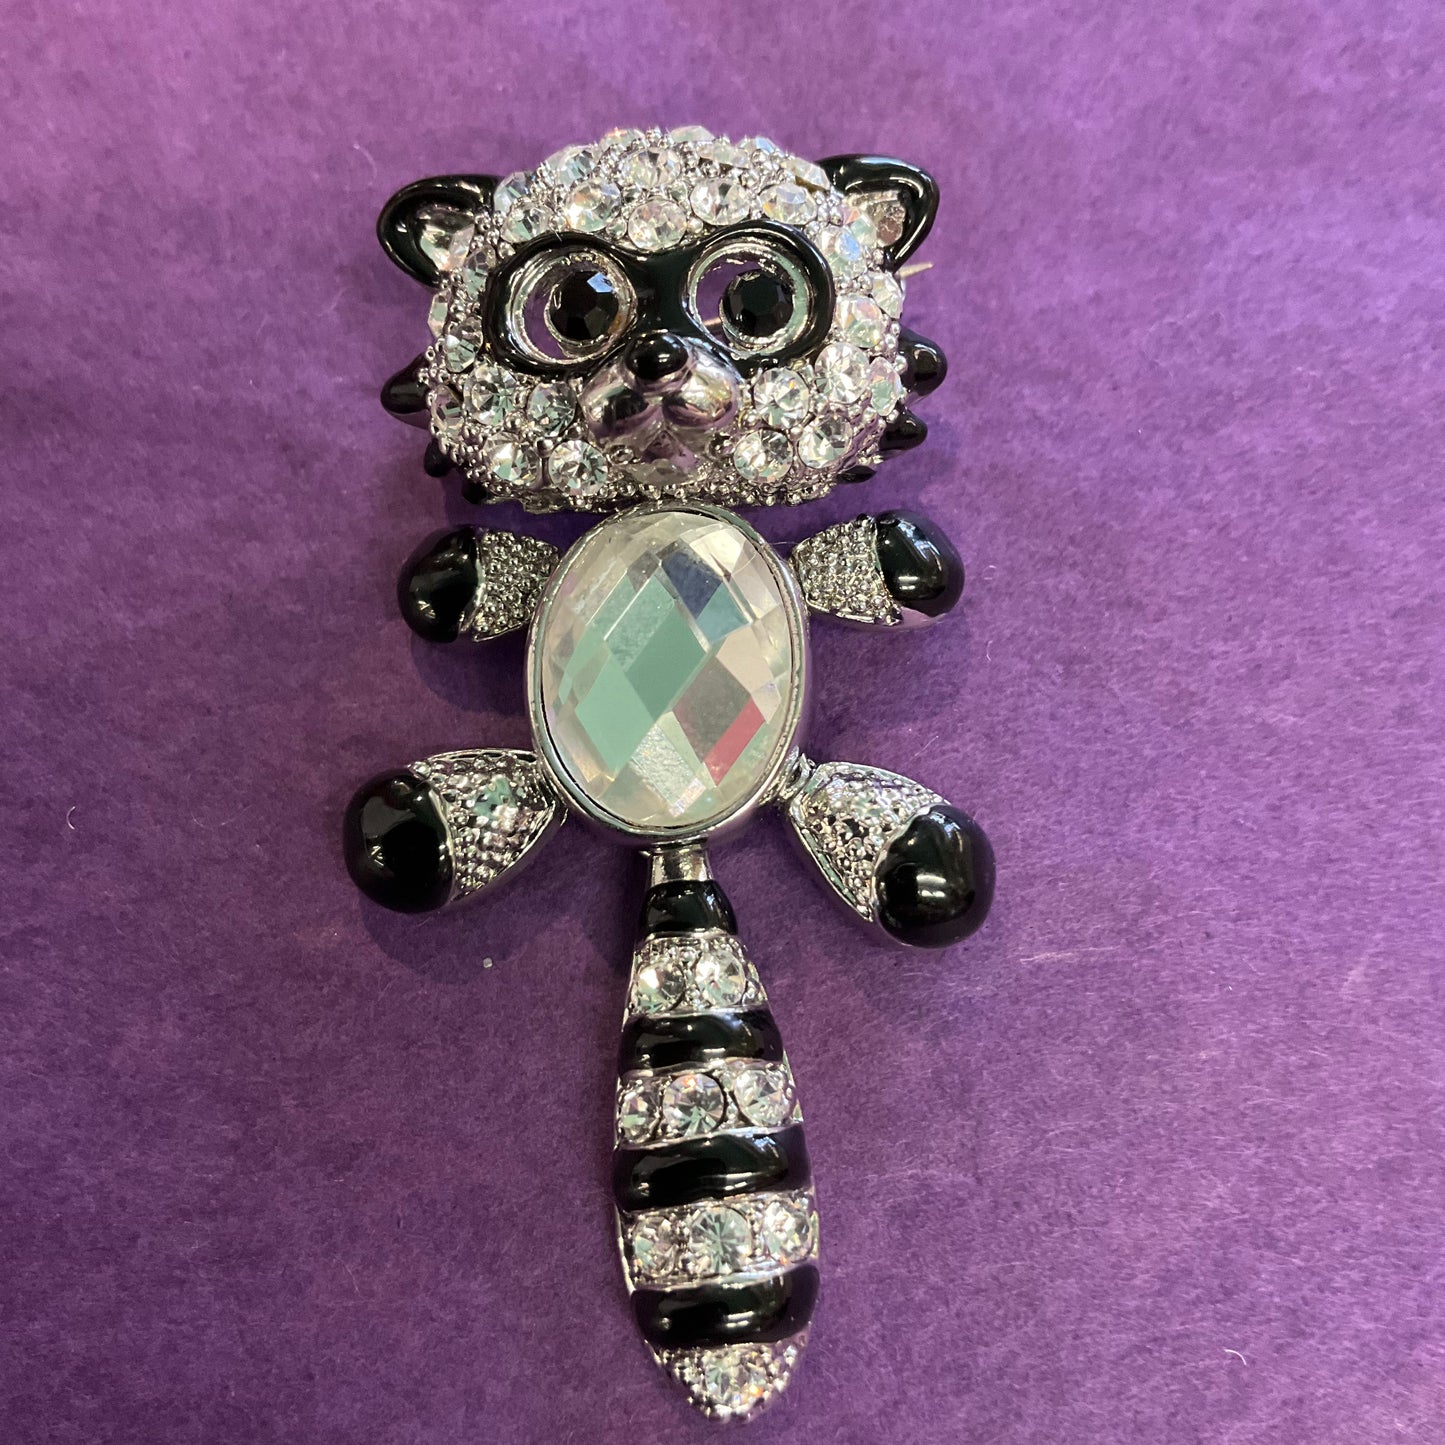 Vintage Butler and Wilson oversized Enamel and Crystal Raccoon Brooch, gift for her.